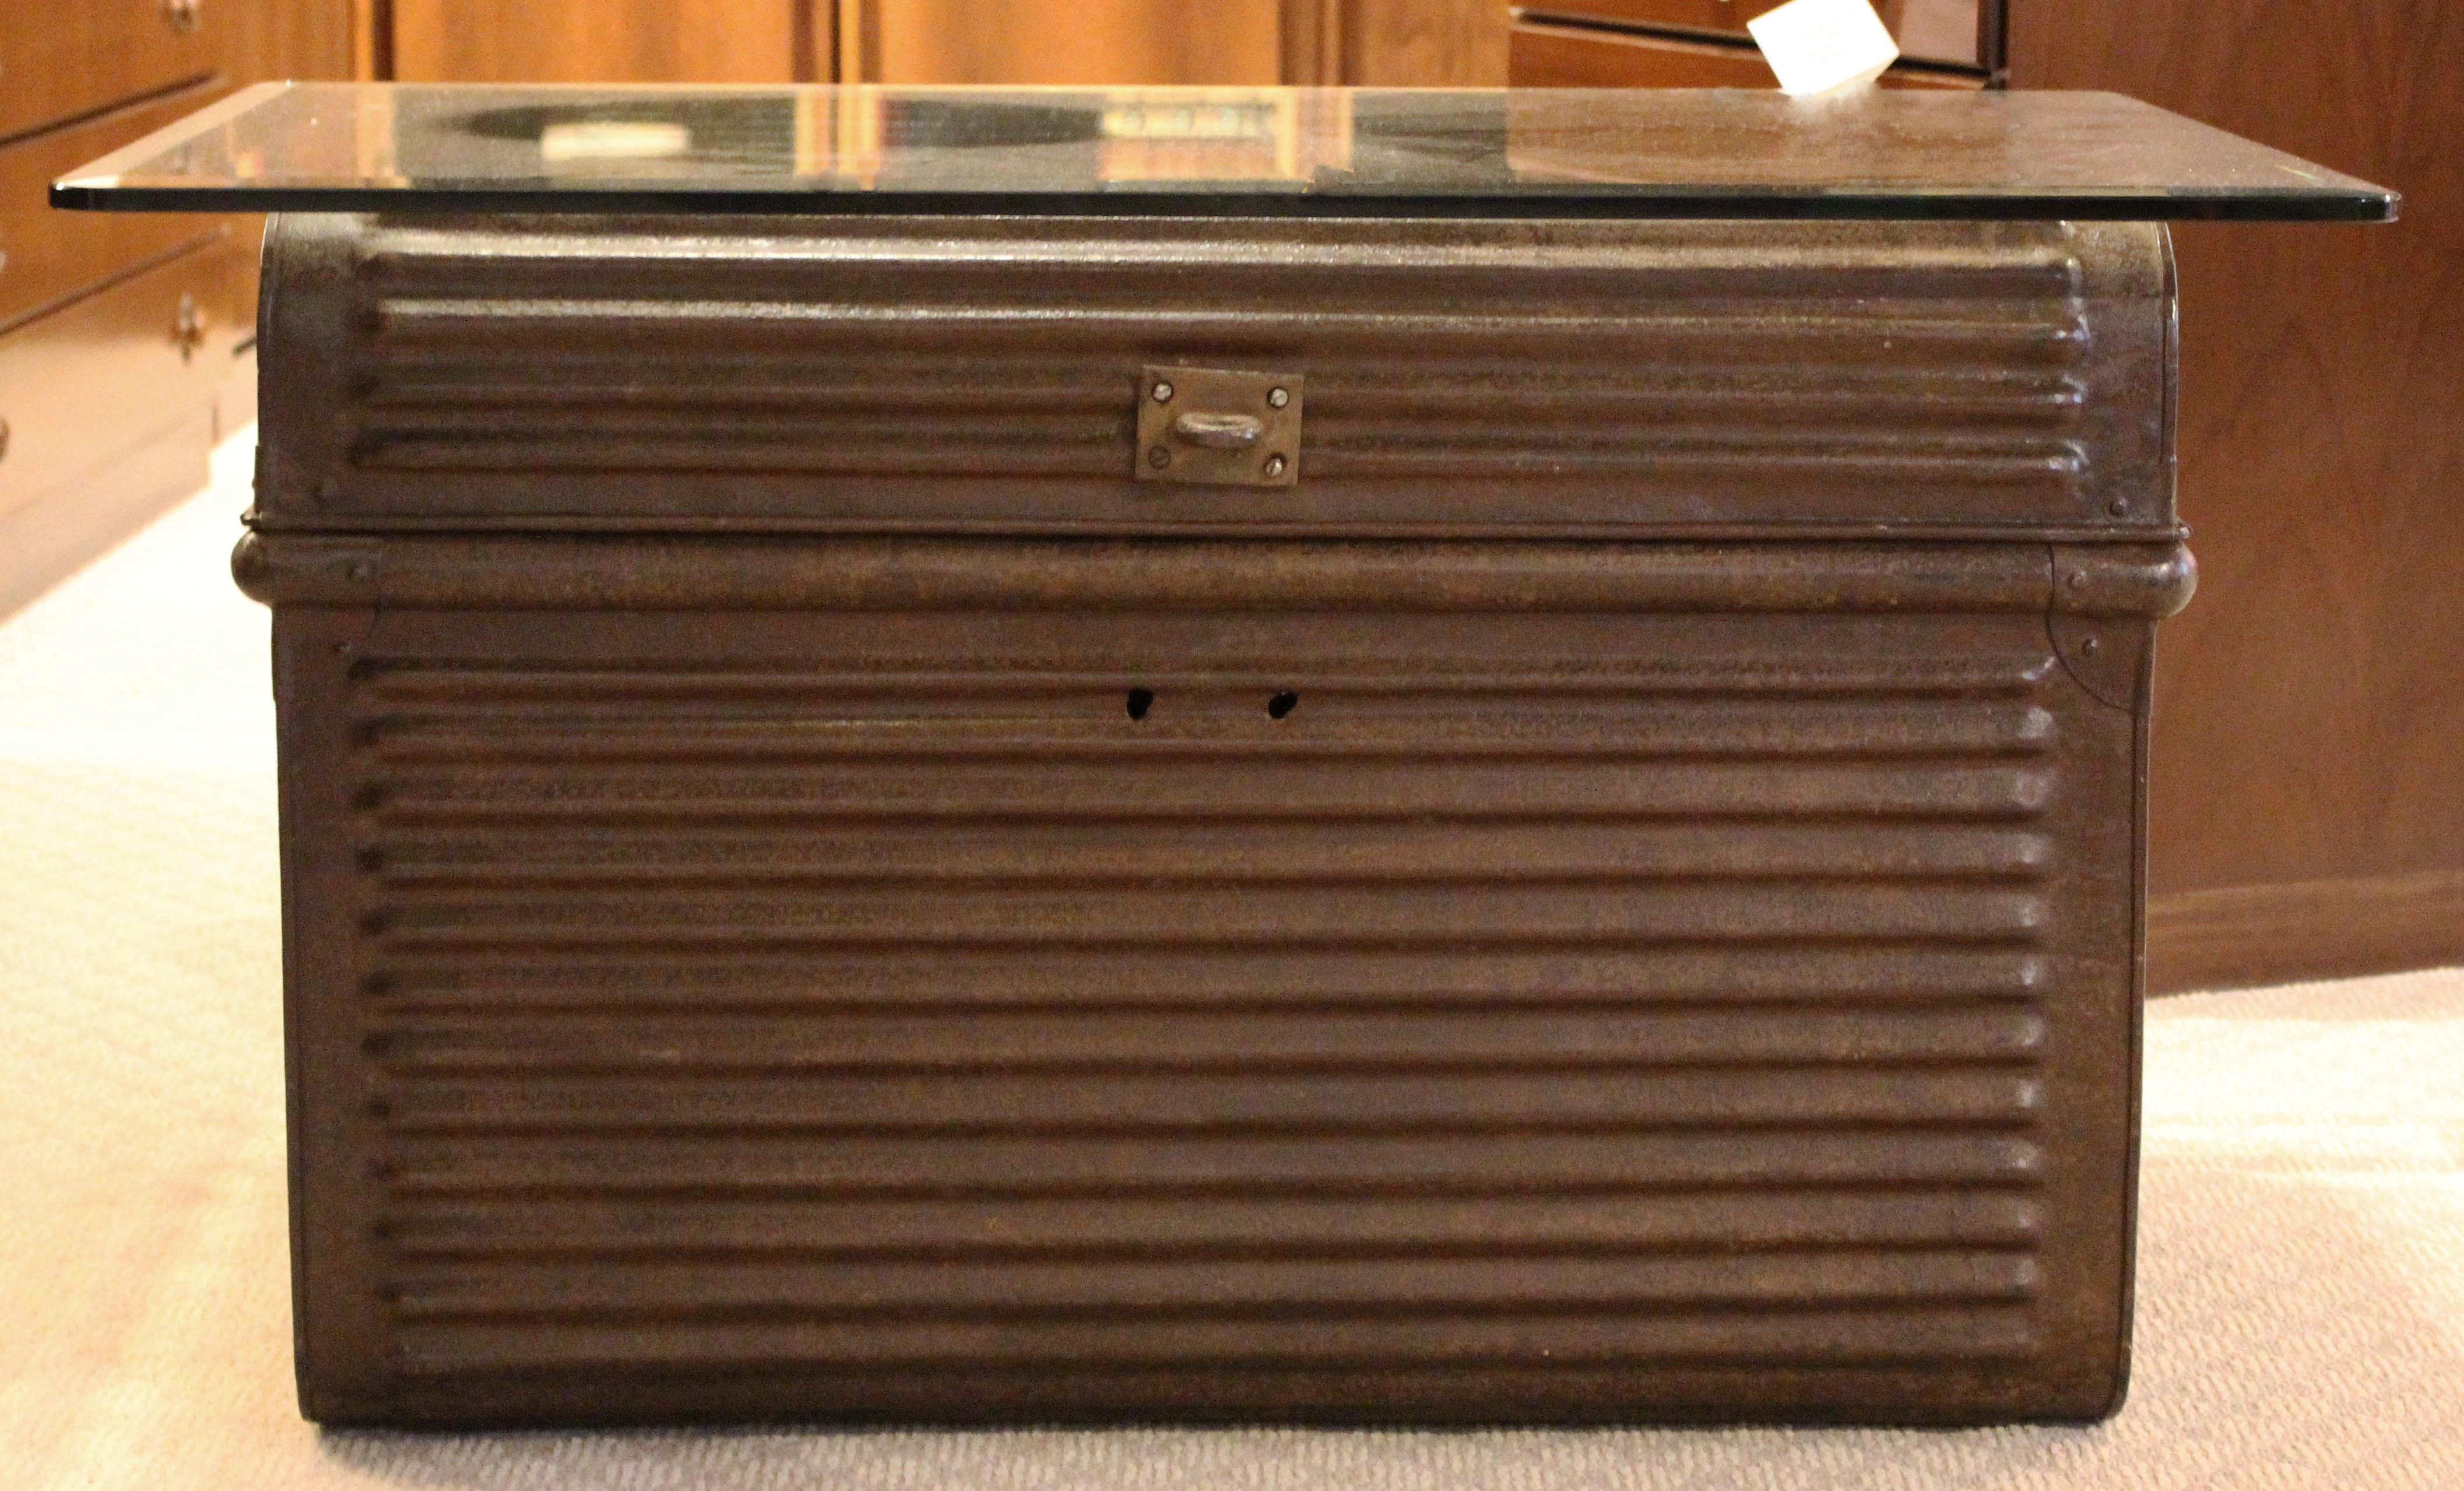 Ribbed metal trunk with handles - wonderful old original finish. Red painted interior with remnants of paper labels. English, mid-20th century. Now with glass top for a coffee table. Trunk: 30 1/2